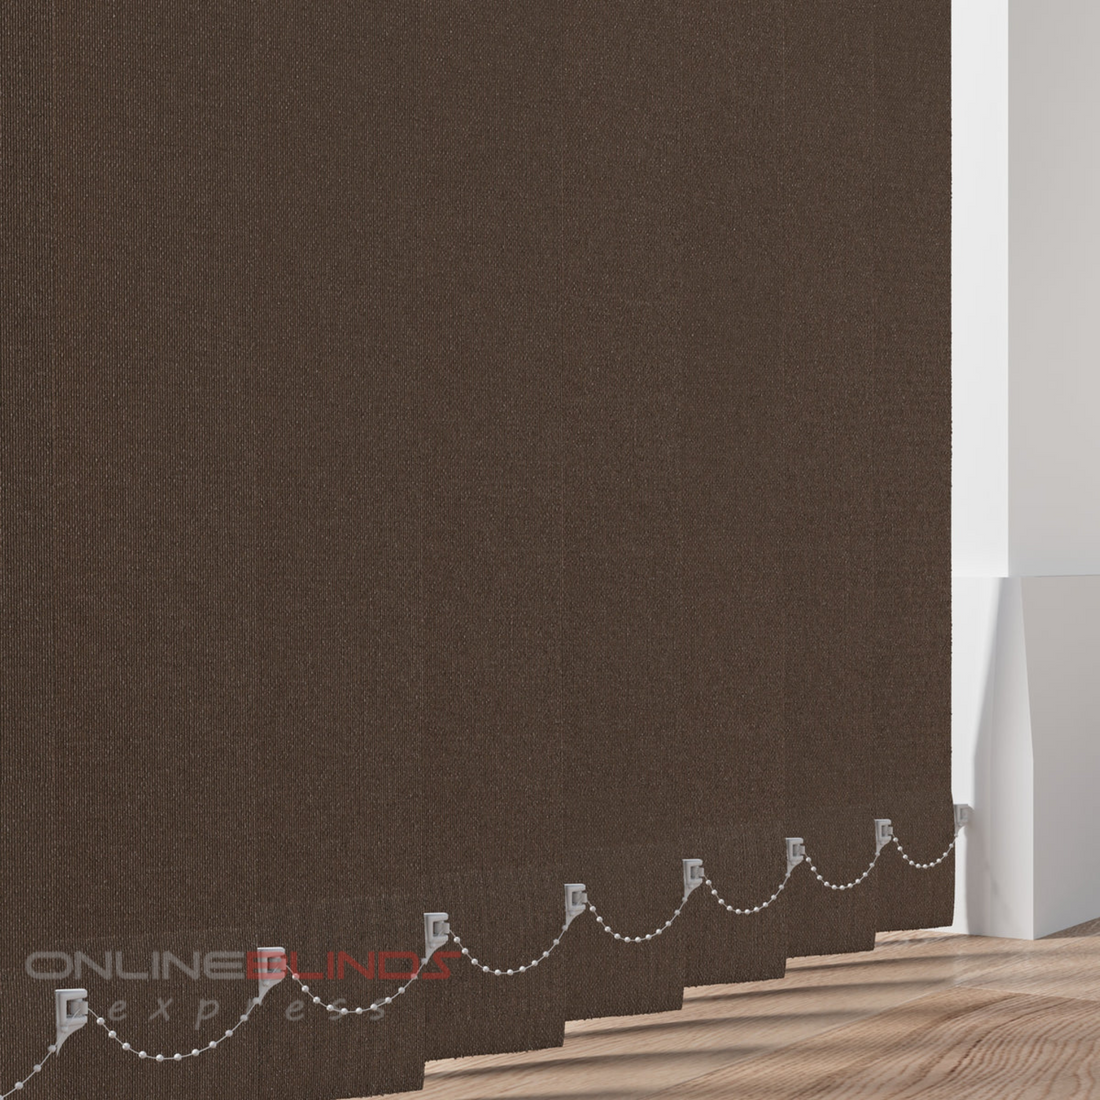 Cairo Chocolate - Blackout Vertical Blinds